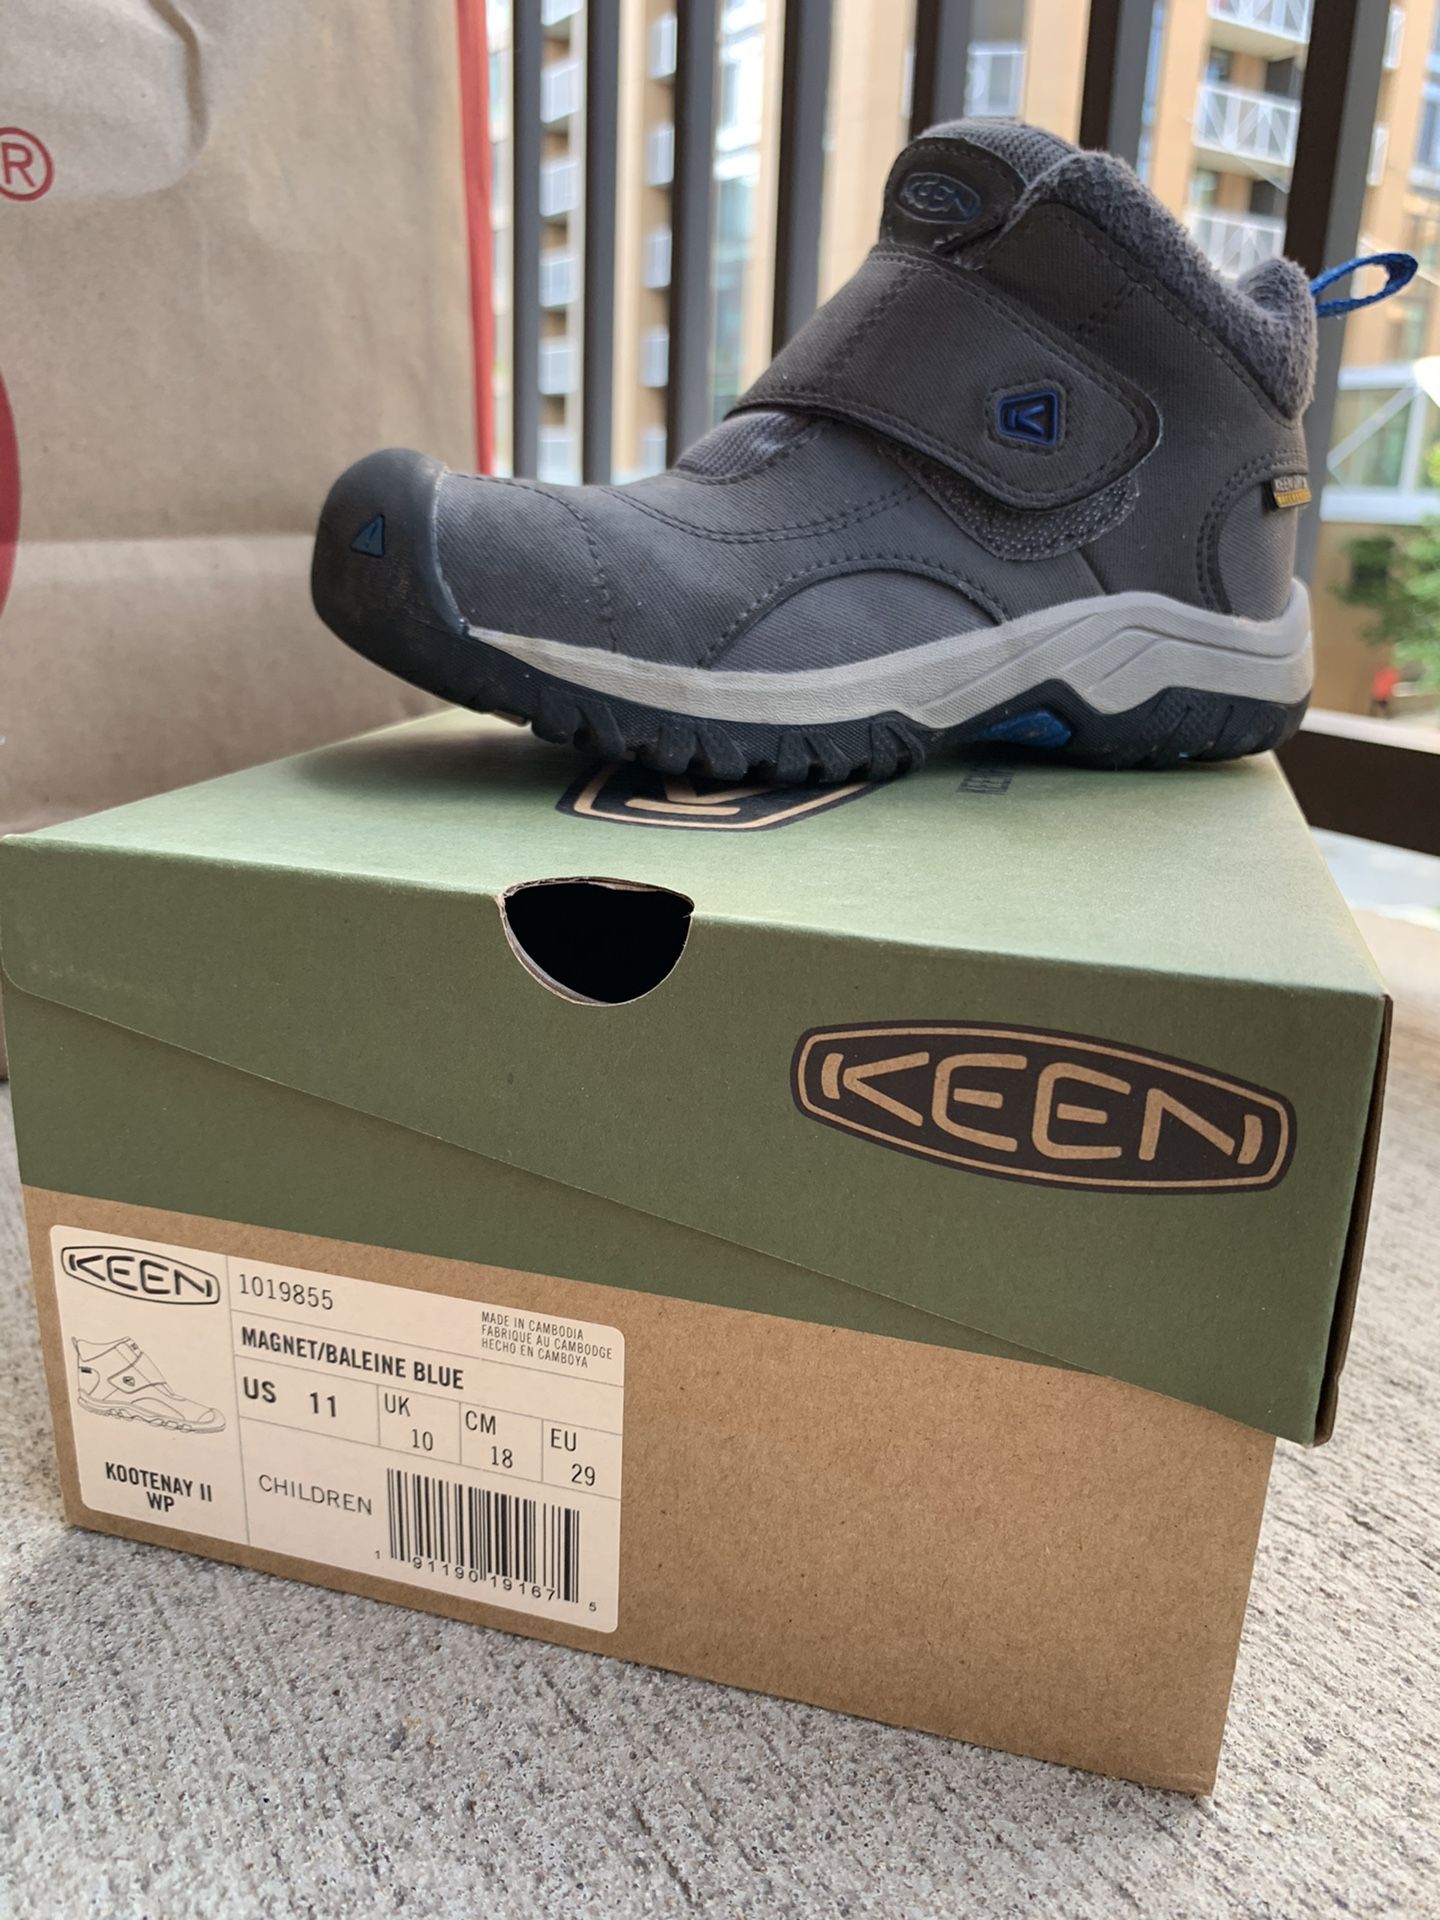 Keen, kid’s shoes, size 11 US